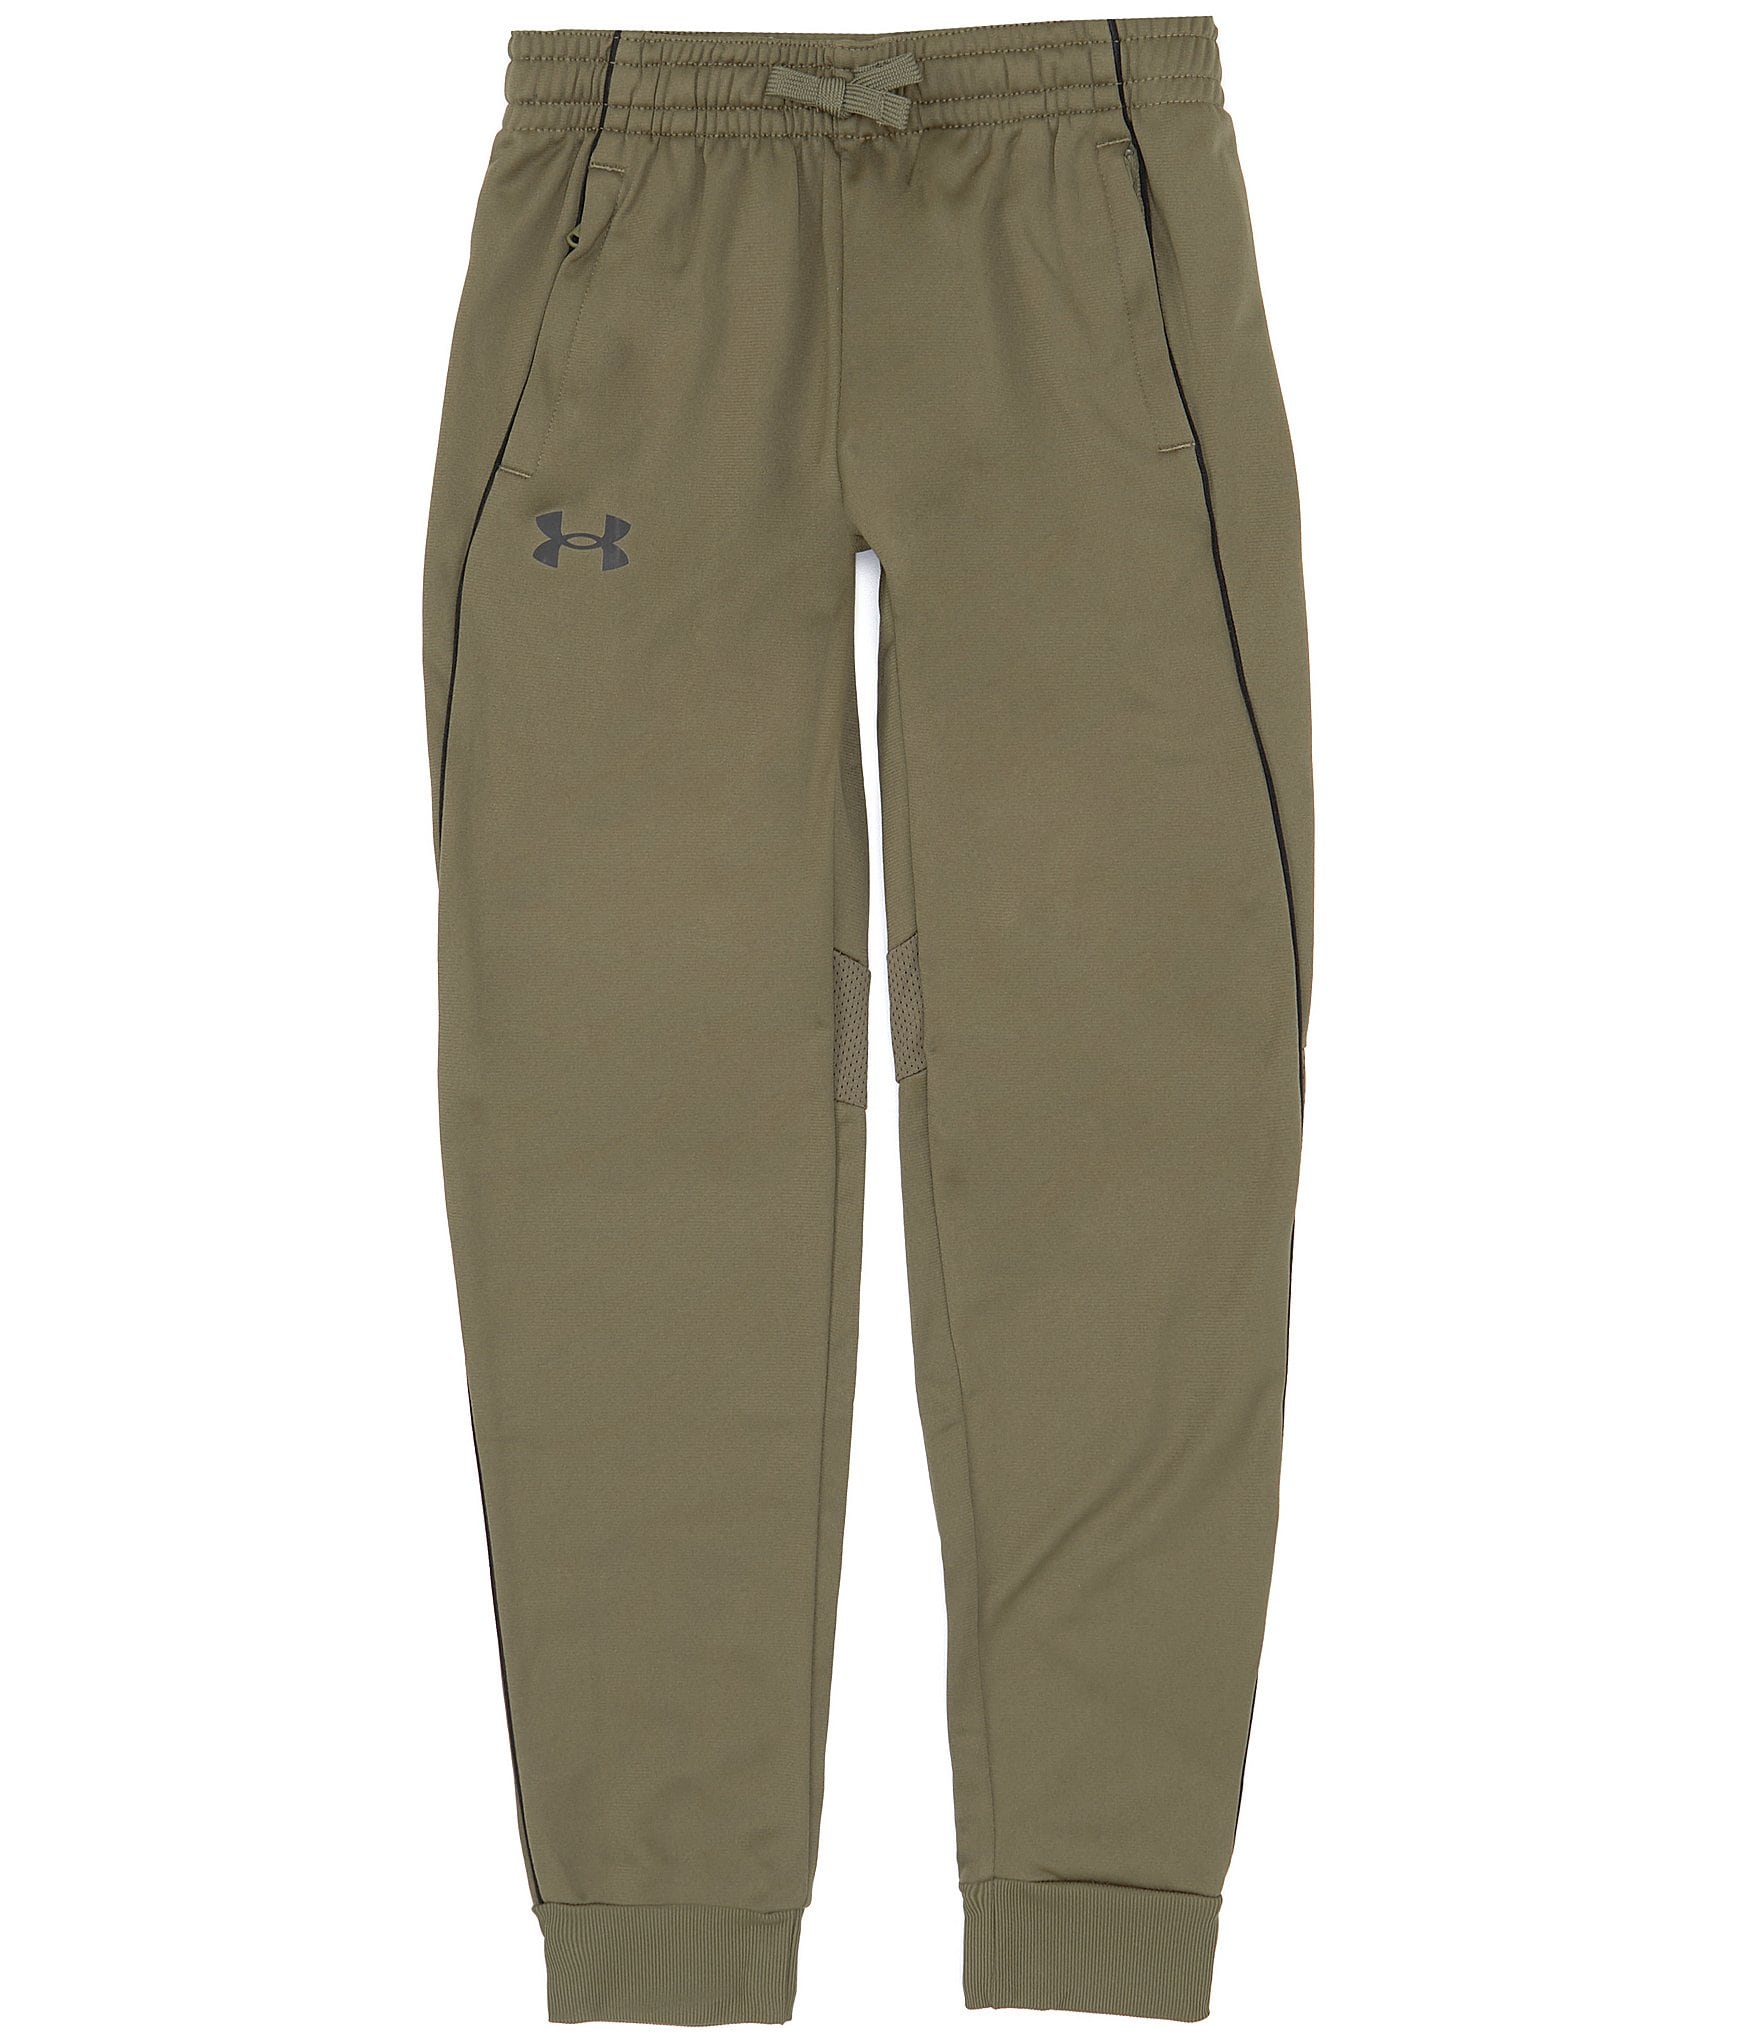  Under Armour Men's Rival Terry Printed Joggers, (465